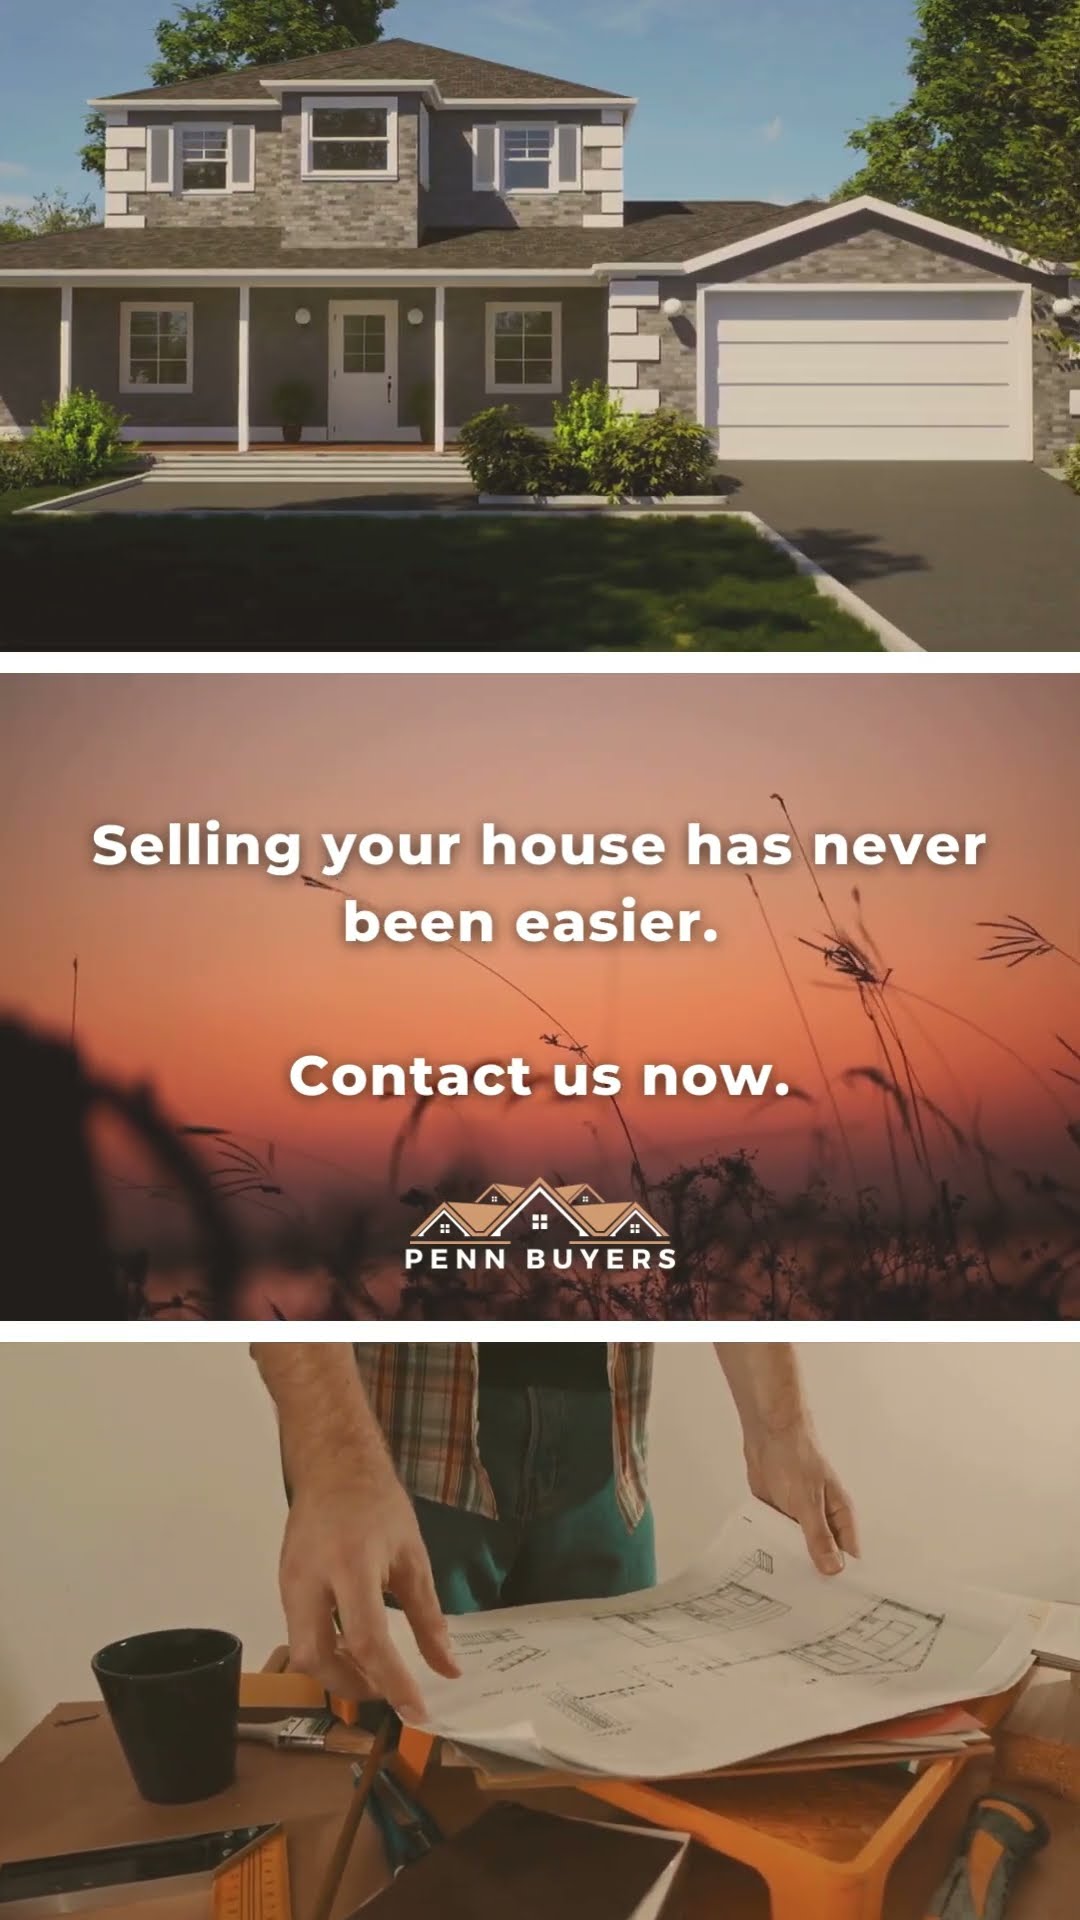 Sell Your House With Pennbuyers!